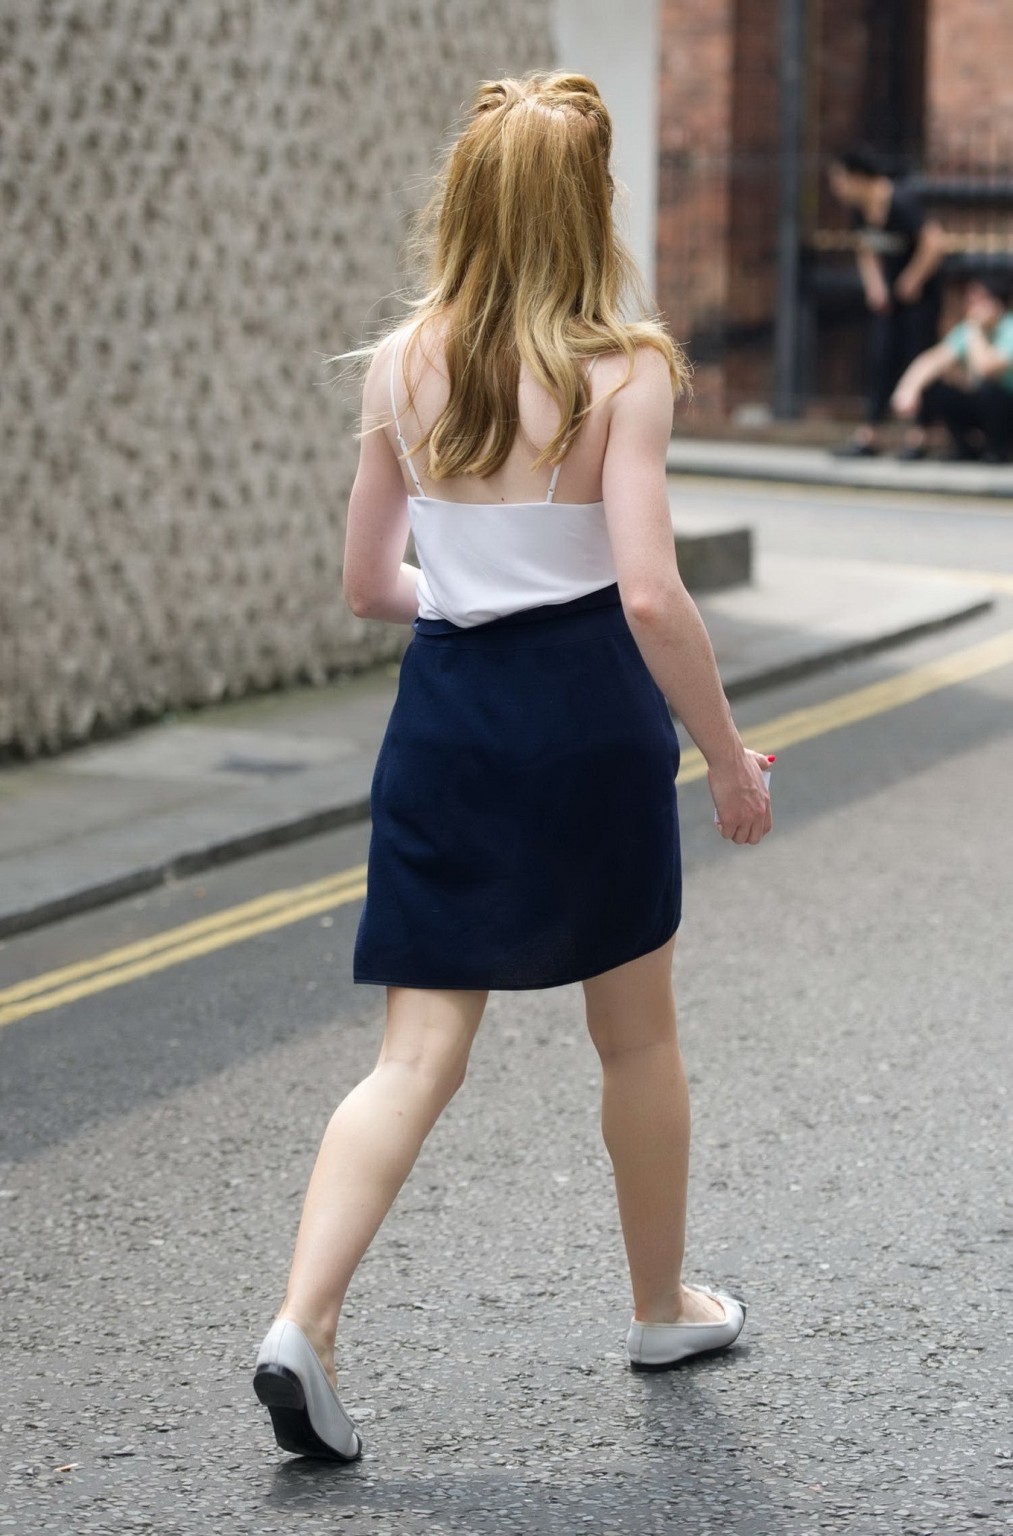 Nicola Roberts braless wearing white sheer top and blue mini skirt out in London #75224187